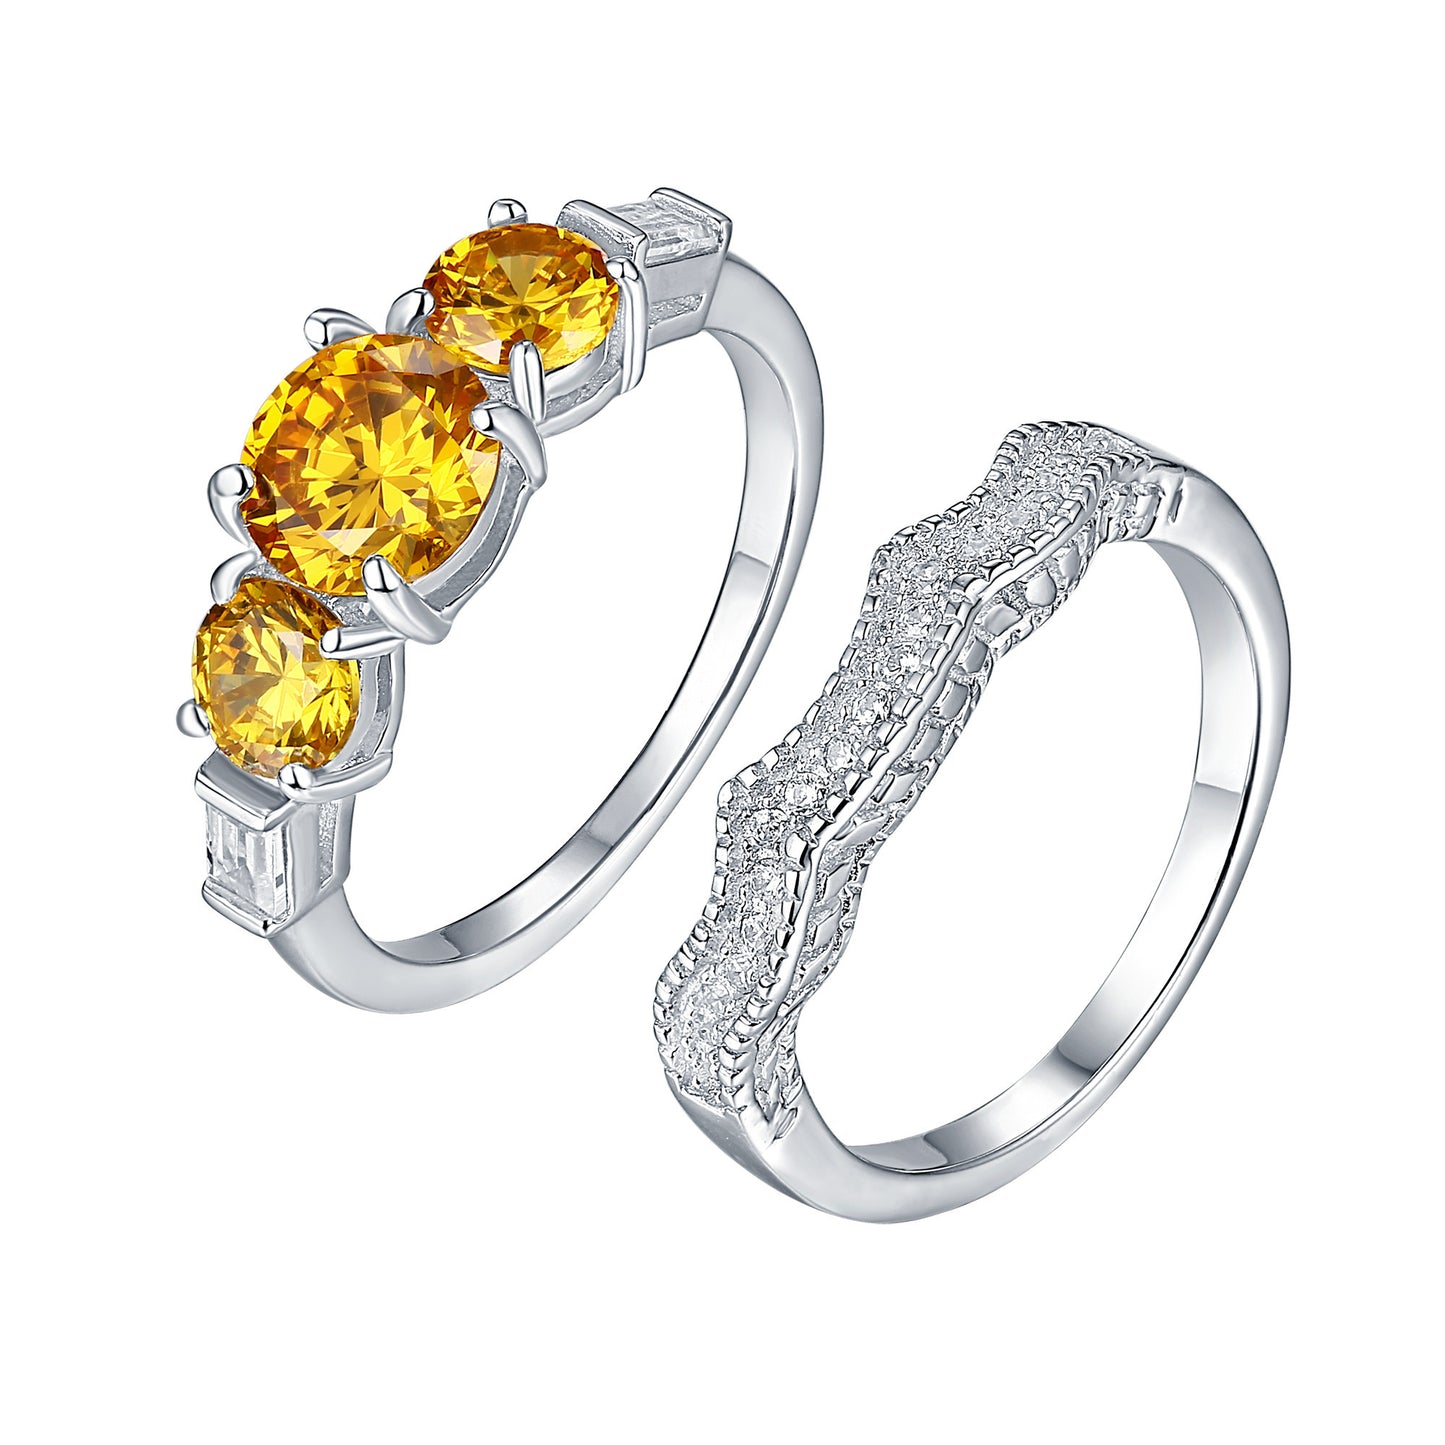 Canary 3 Solitaire Ring Band Set Bridal Engagement Set 925 Silver